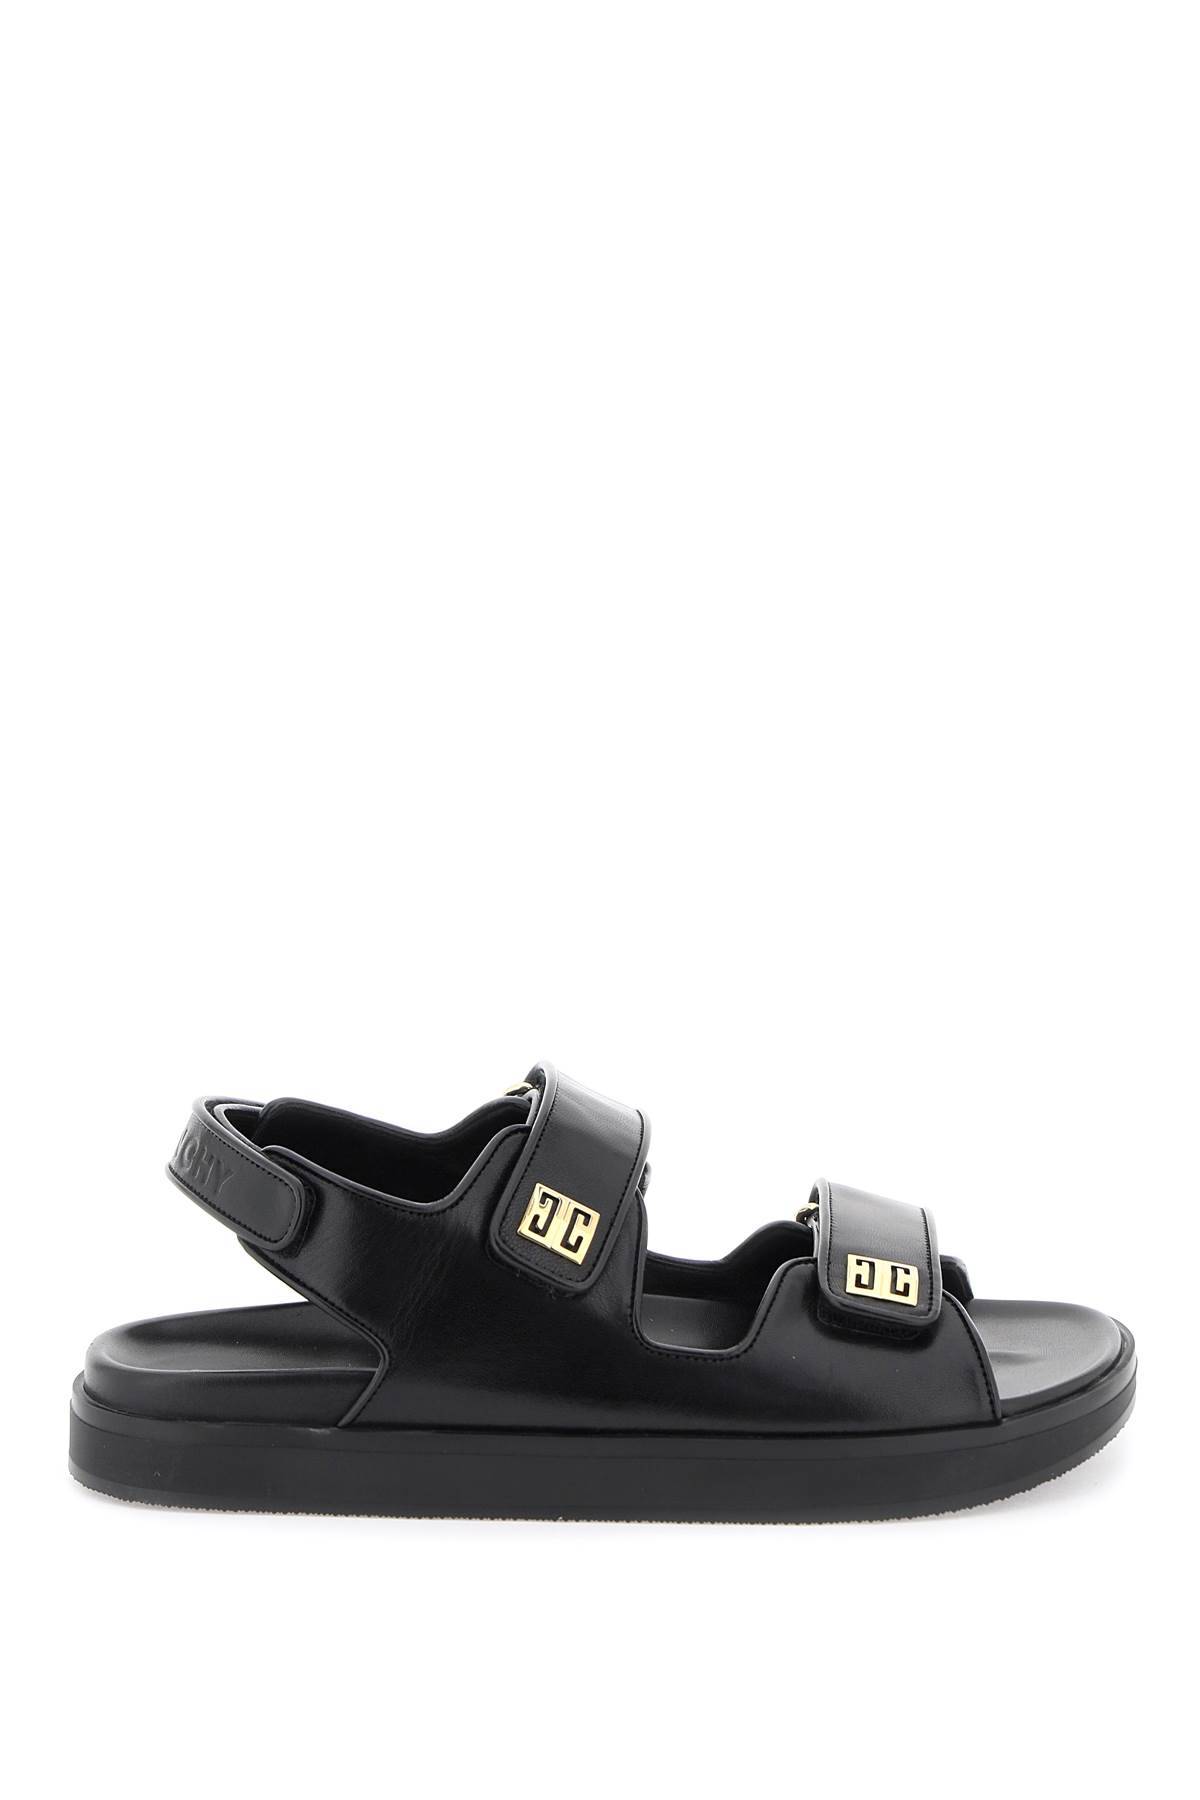 Givenchy GIVENCHY leather 4g sandals